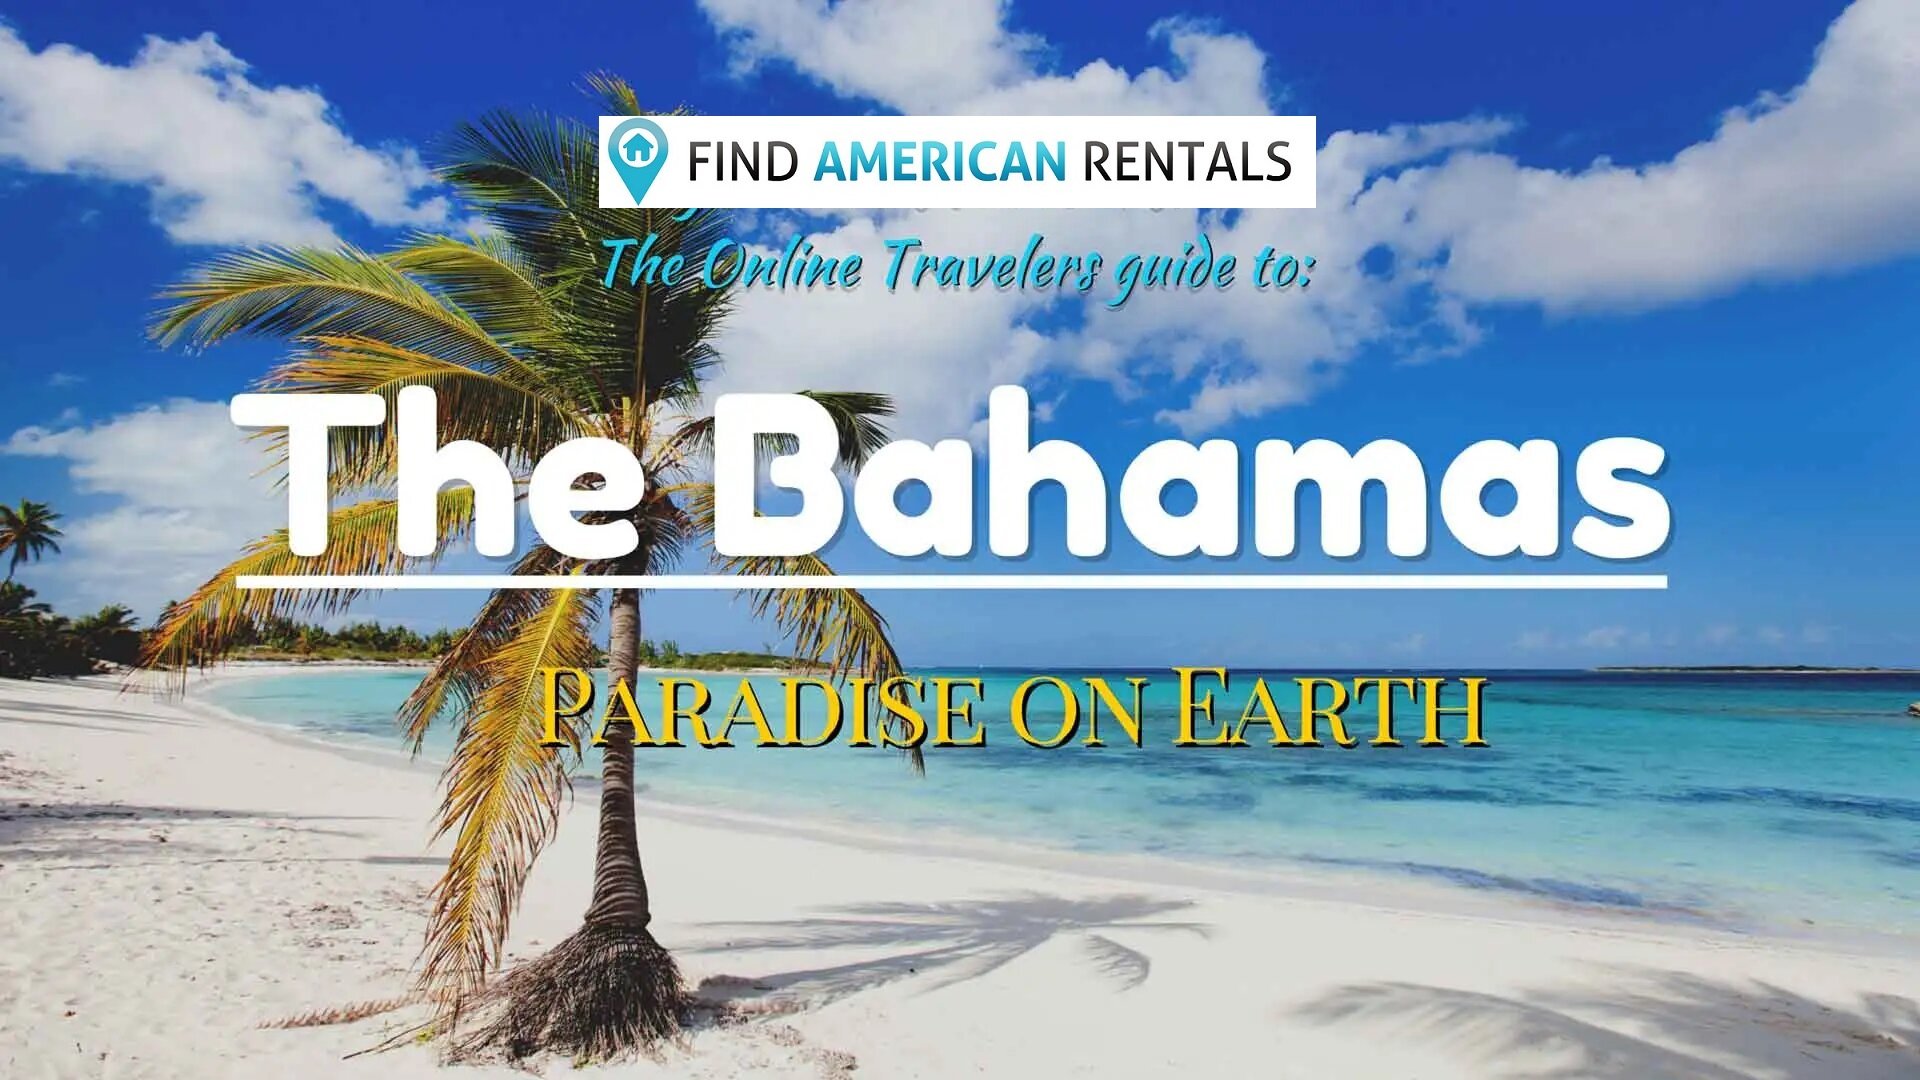 Extravagant Tropical Vacation in the Bahamas with Find American Rentals